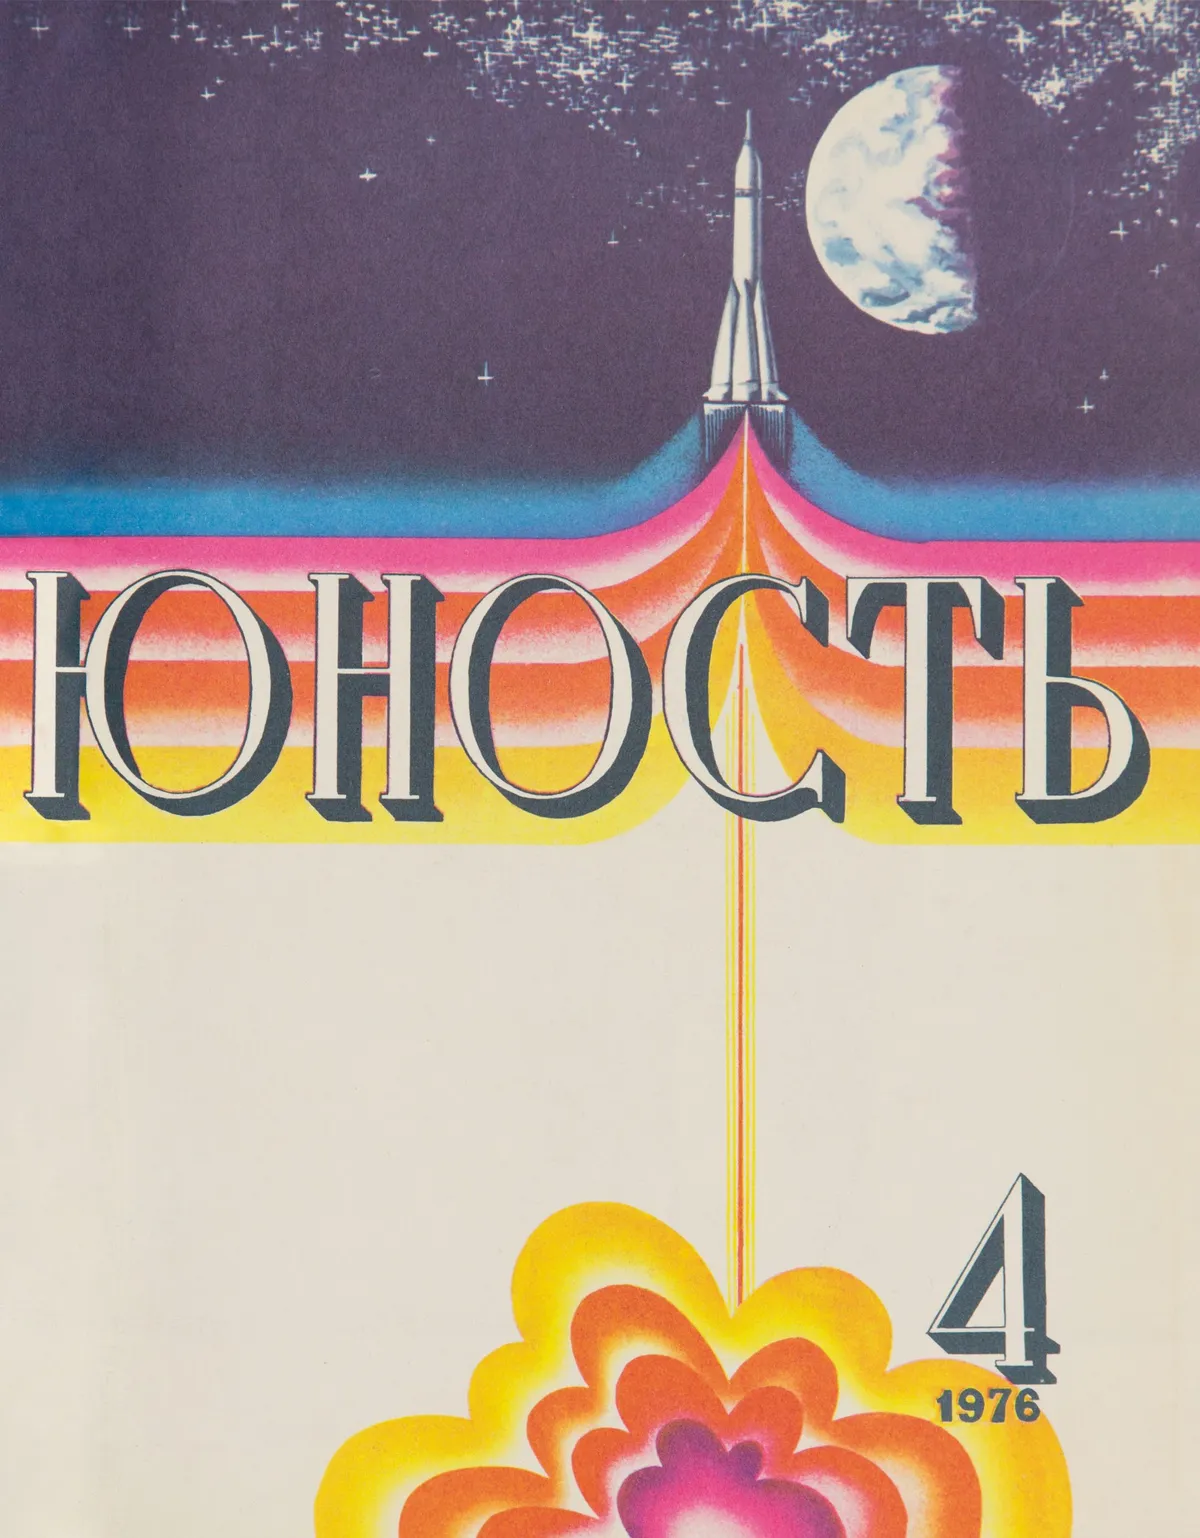 Youth, issue 4, 1976, illustration by V. Kotlyar. Picture credit: The Moscow Design Museum